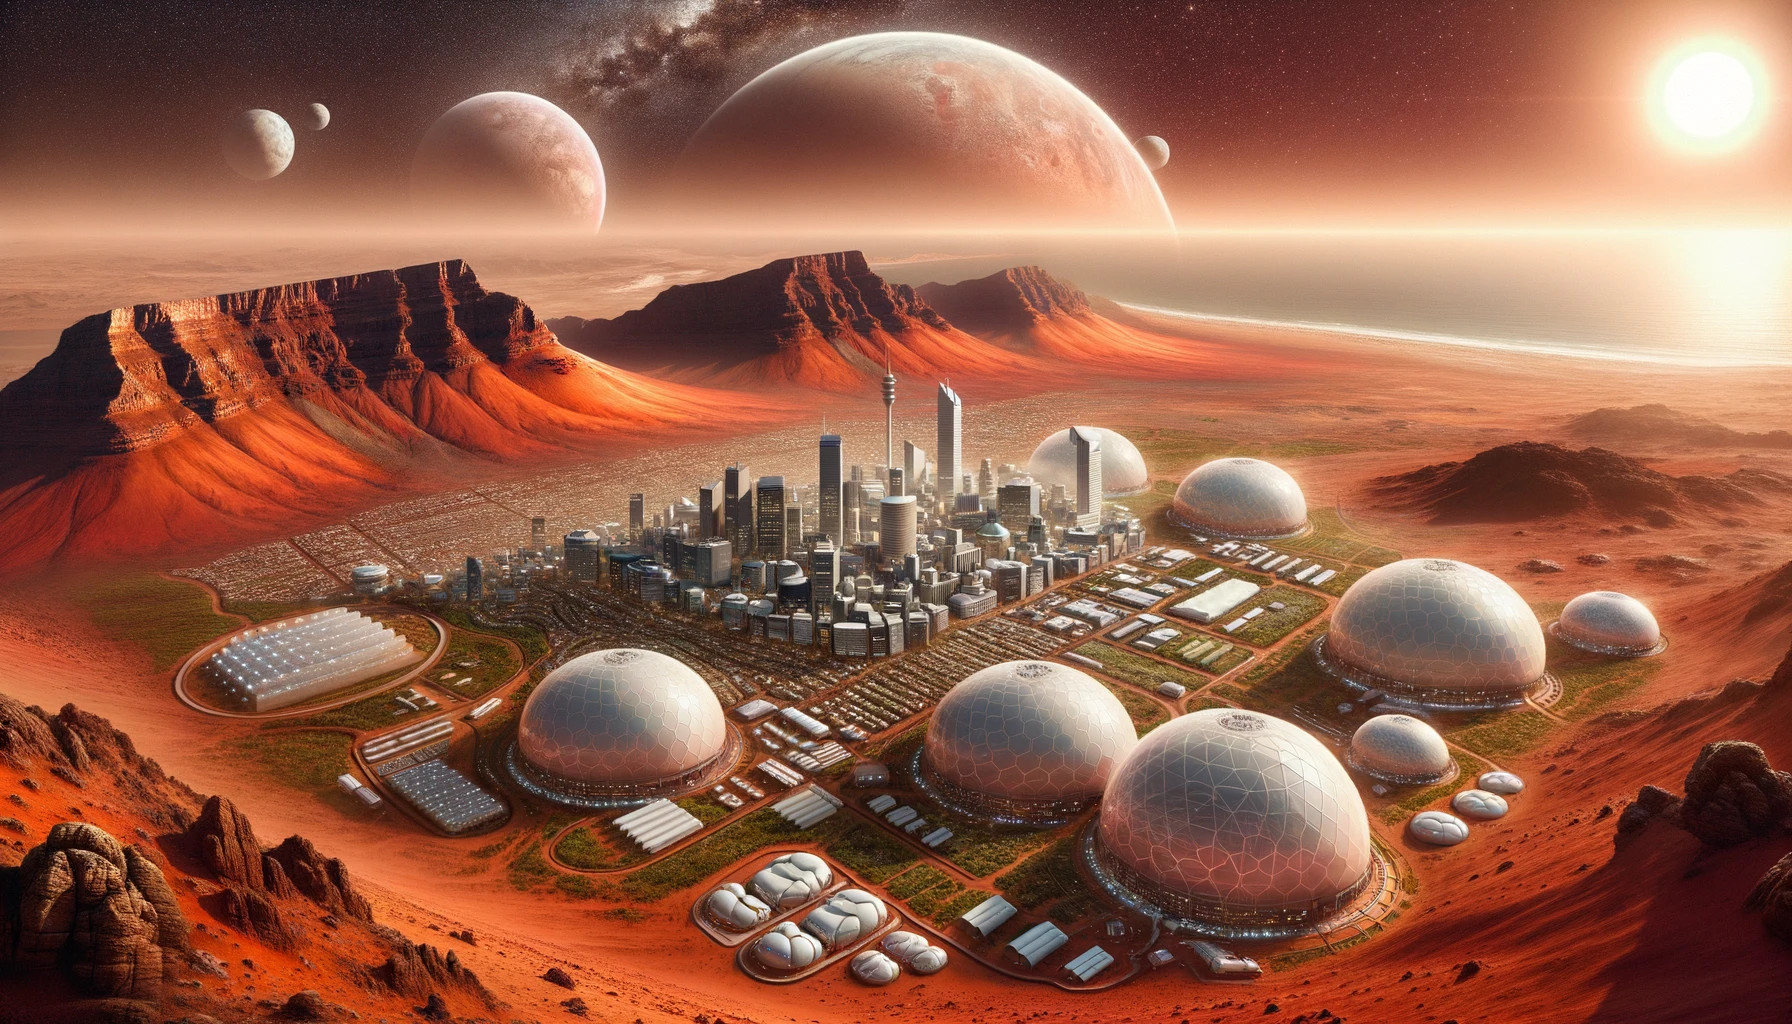 Artistic conception of Cape Town on Mars. The familiar landmarks of Cape Town are juxtaposed against the alien backdrop of the Red Planet. Bio-domes shelter the city, and advanced infrastructure hints at a thriving Martian colony. The vastness of the Martian landscape stretches out, with dunes and rock formations.